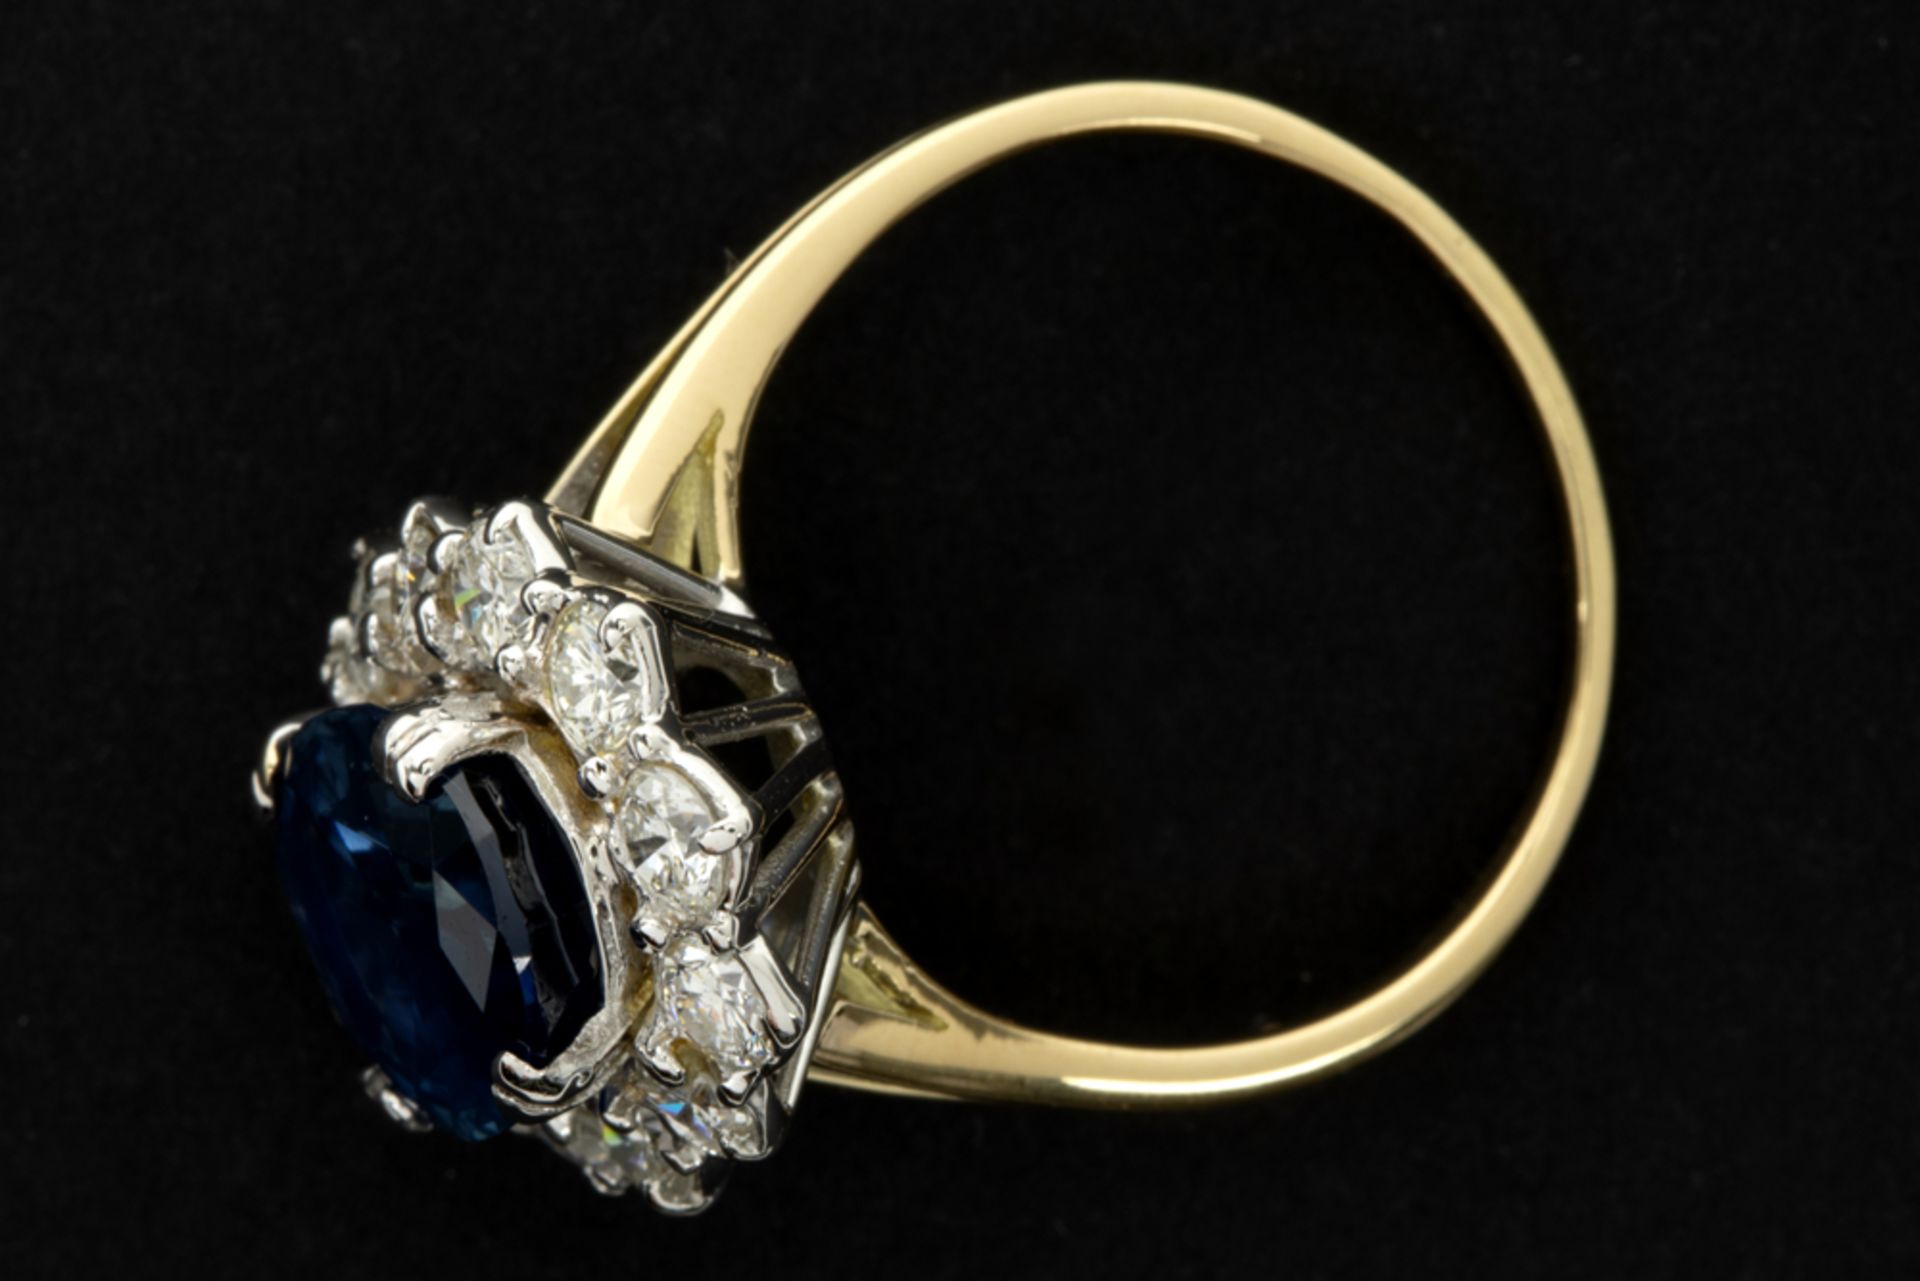 nice vintage ring in yellow and white gold (18 carat) with an at least 5 carat sapphire surrounded - Image 2 of 2